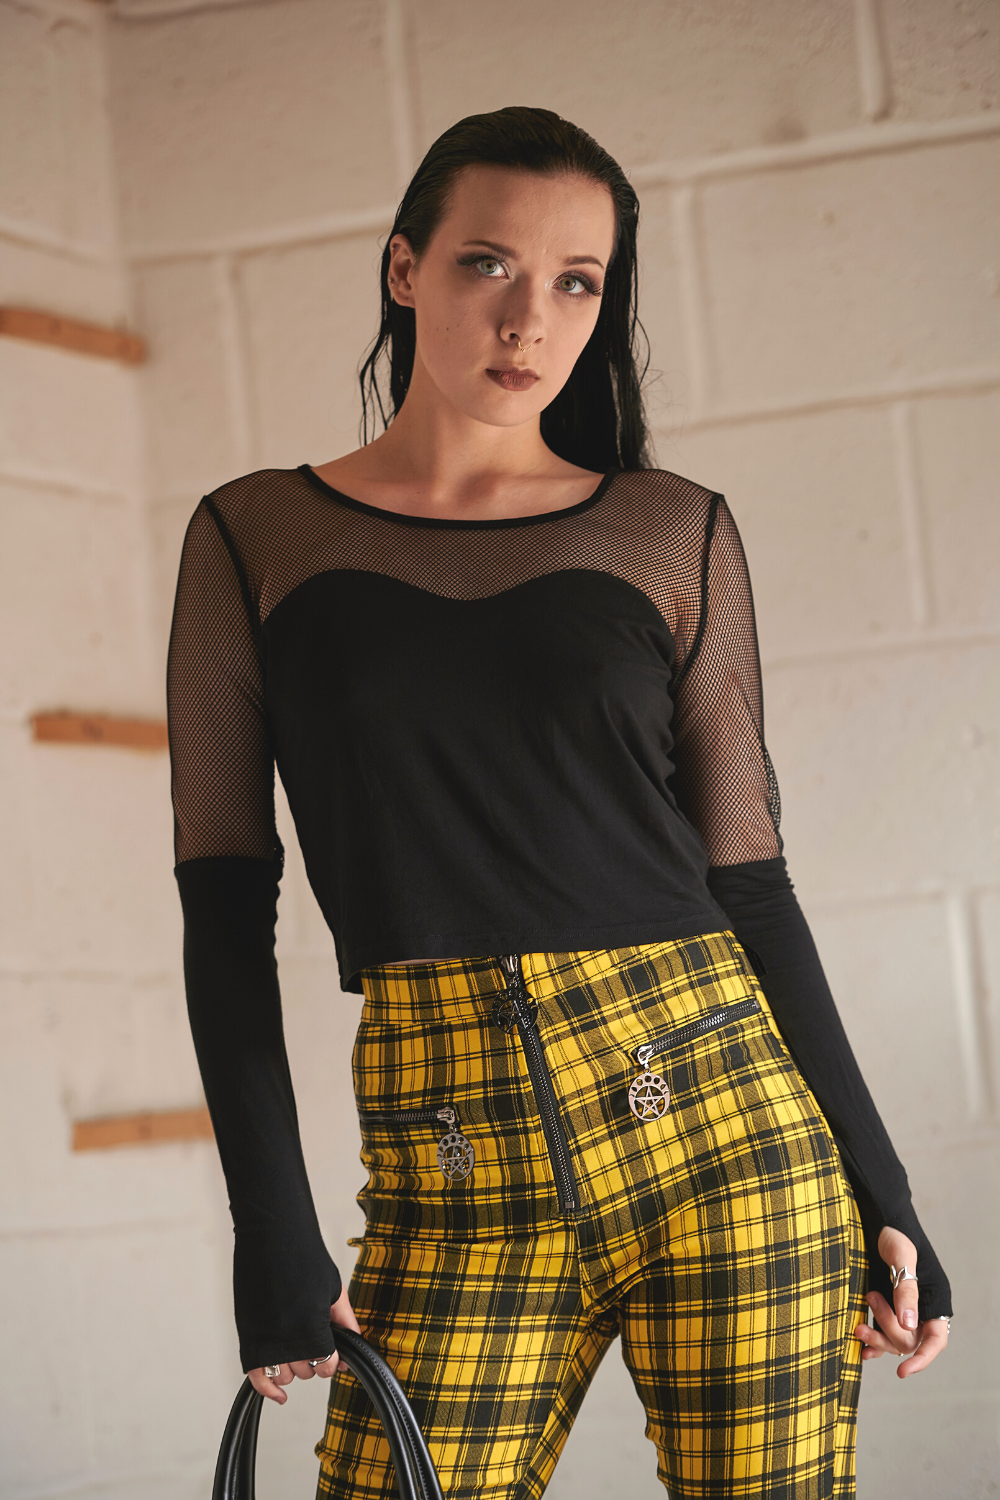 Grunge model wearing mesh long sleeve top with thumb holes in black and yellow tartan high wait trousers 